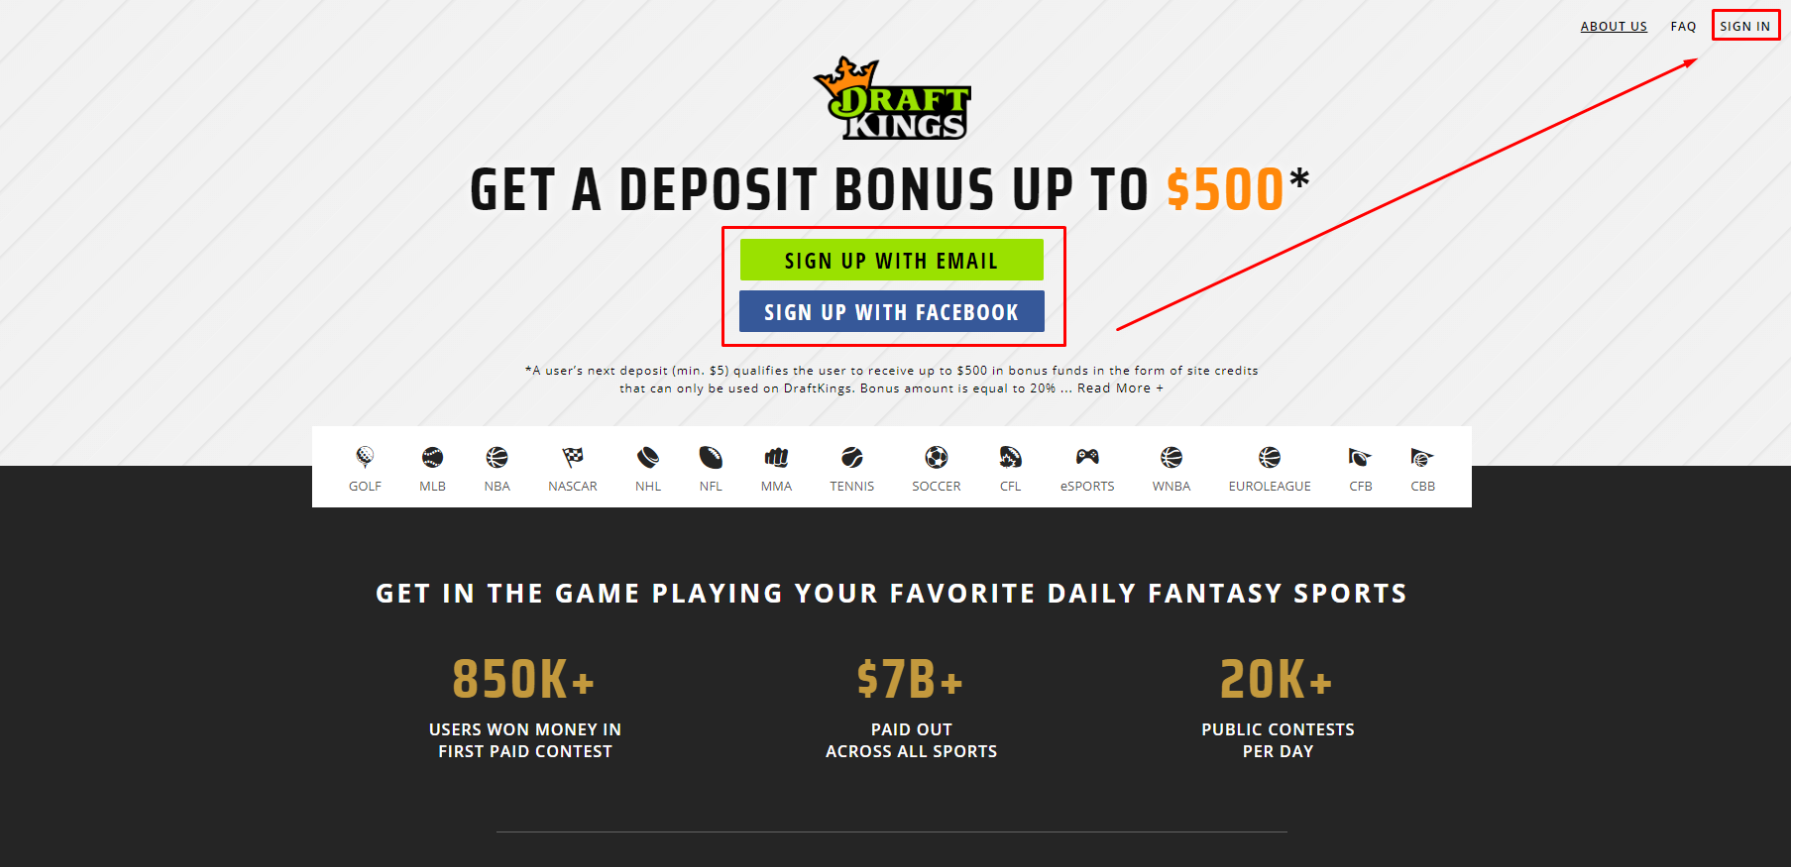 How to enter promo code on draftkings?